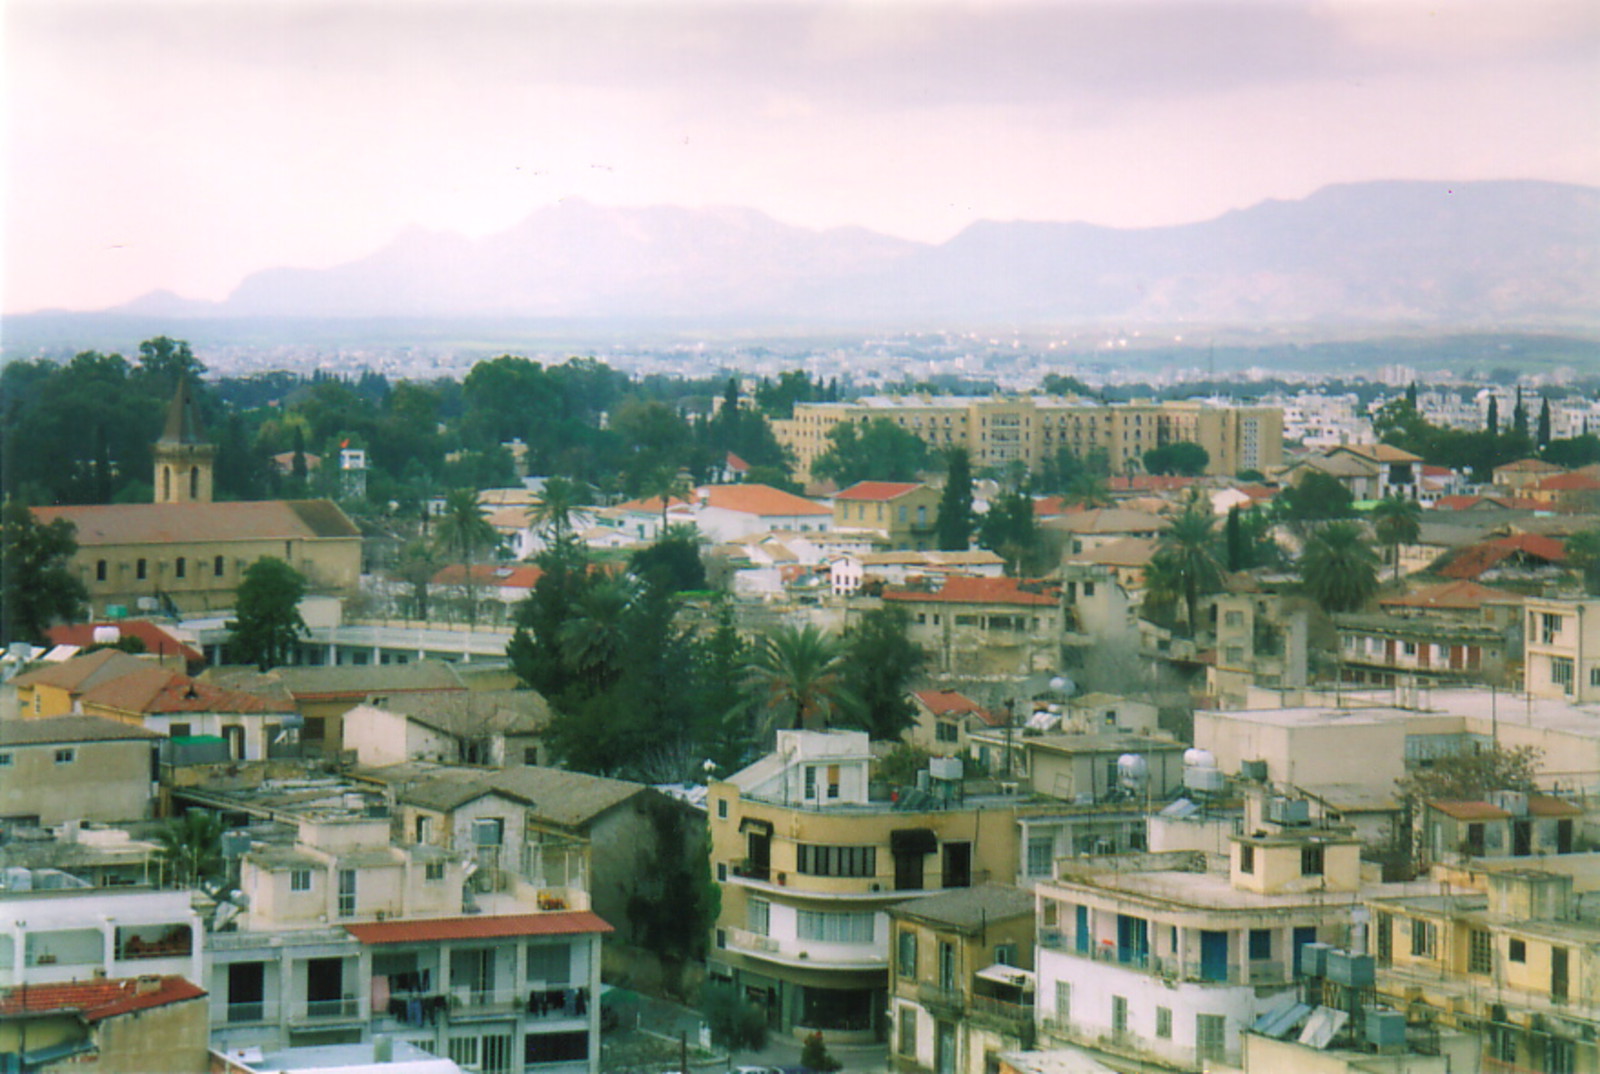 Nicosia from above, looking towards the Ledra Palace Hotel